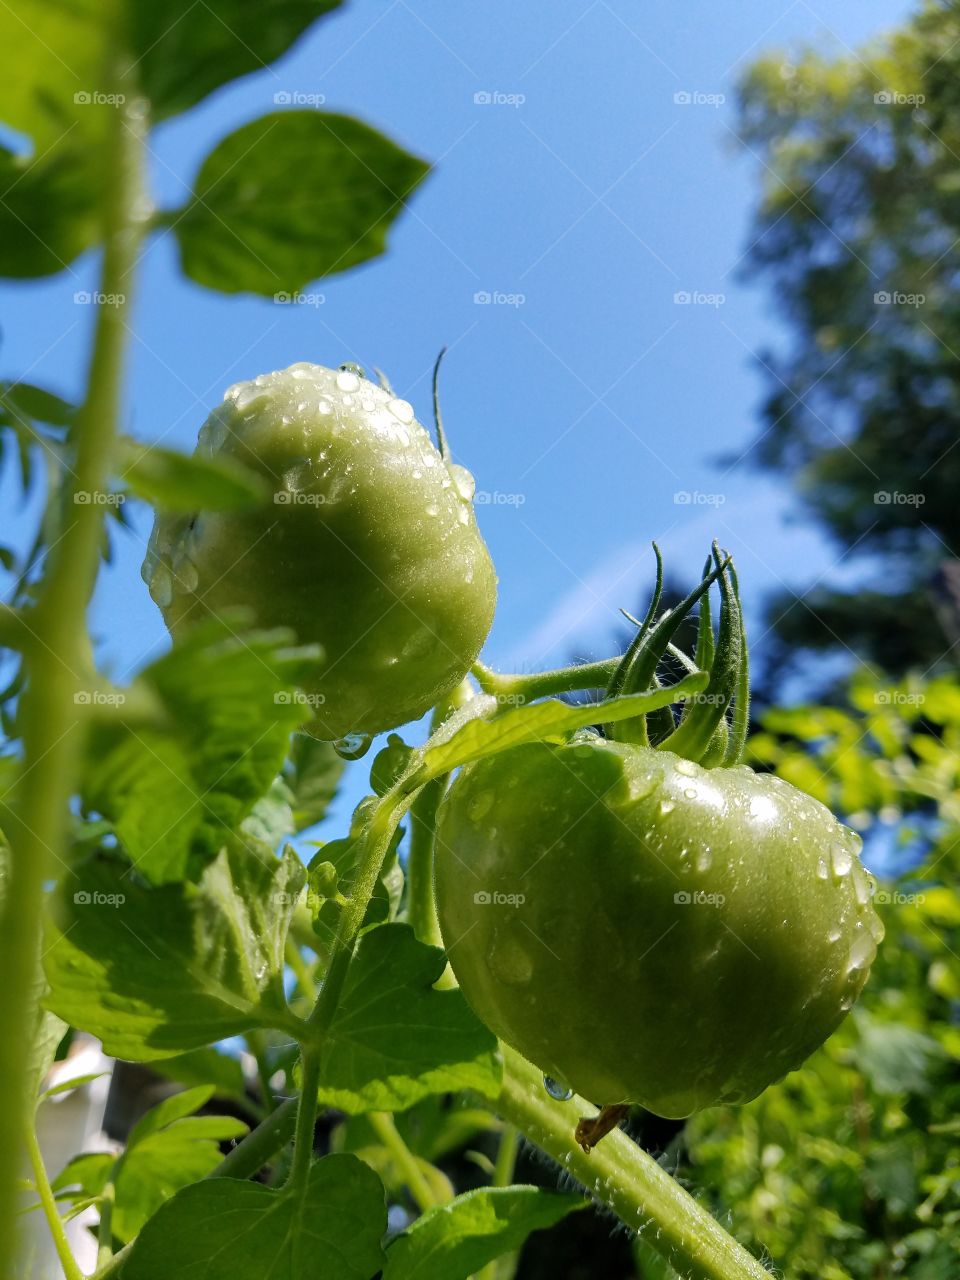 Tomatoes green on vine in sunshine against blue sky will ripen quickly.